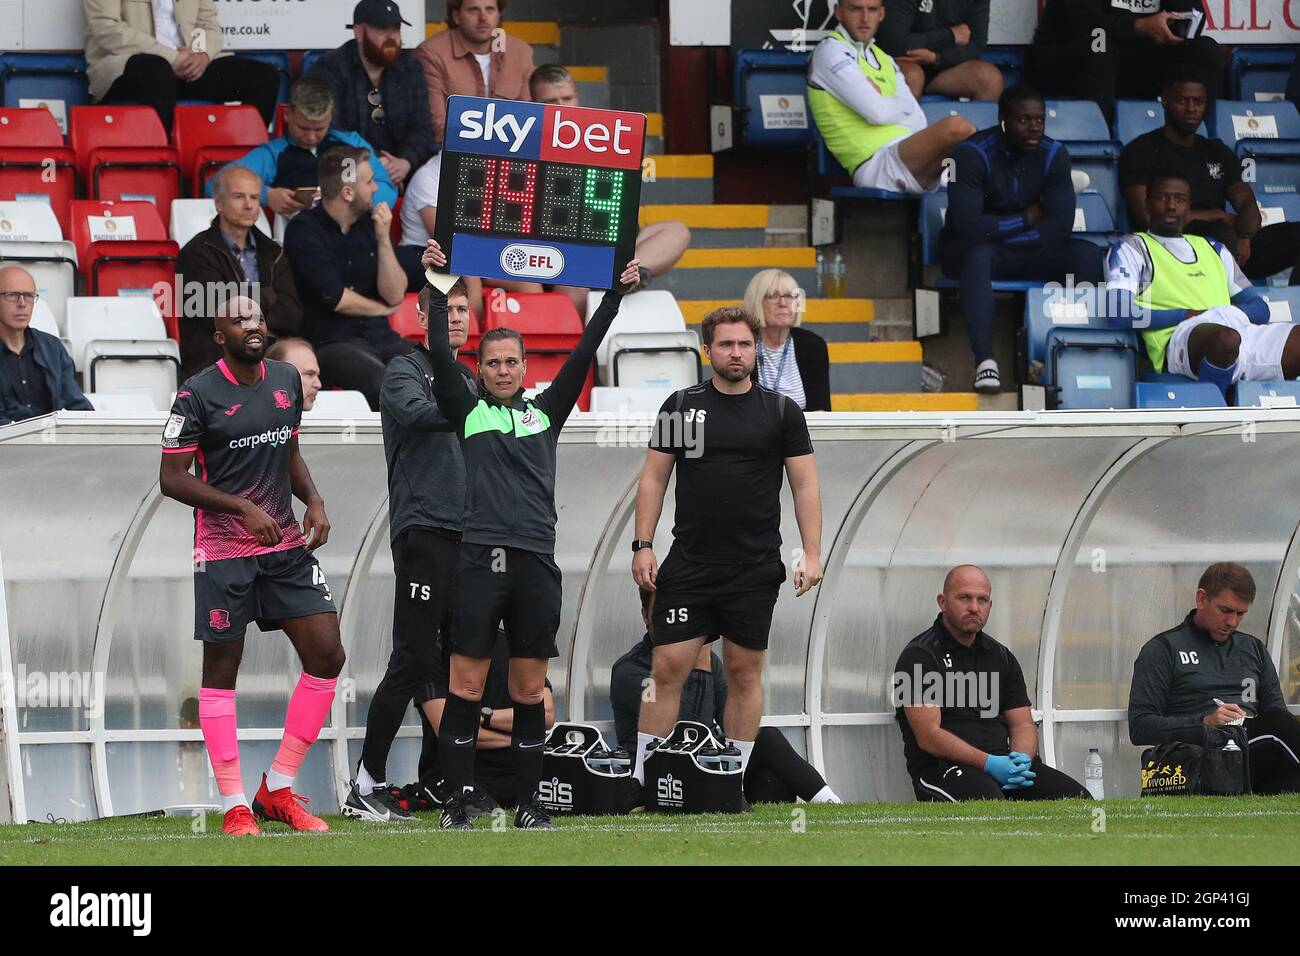 hartlepool-uk-sept-25th-fourth-official-natalie-aspinall-displays-the-sky-bet-substitution-board-during-the-sky-bet-league-2-match-between-hartlepool-united-and-exeter-city-at-victoria-park-hartlepool-on-saturday-25th-september-2021-credit-mark-fletcher-mi-news-credit-mi-news-sport-alamy-live-news-2GP41GJ.jpg